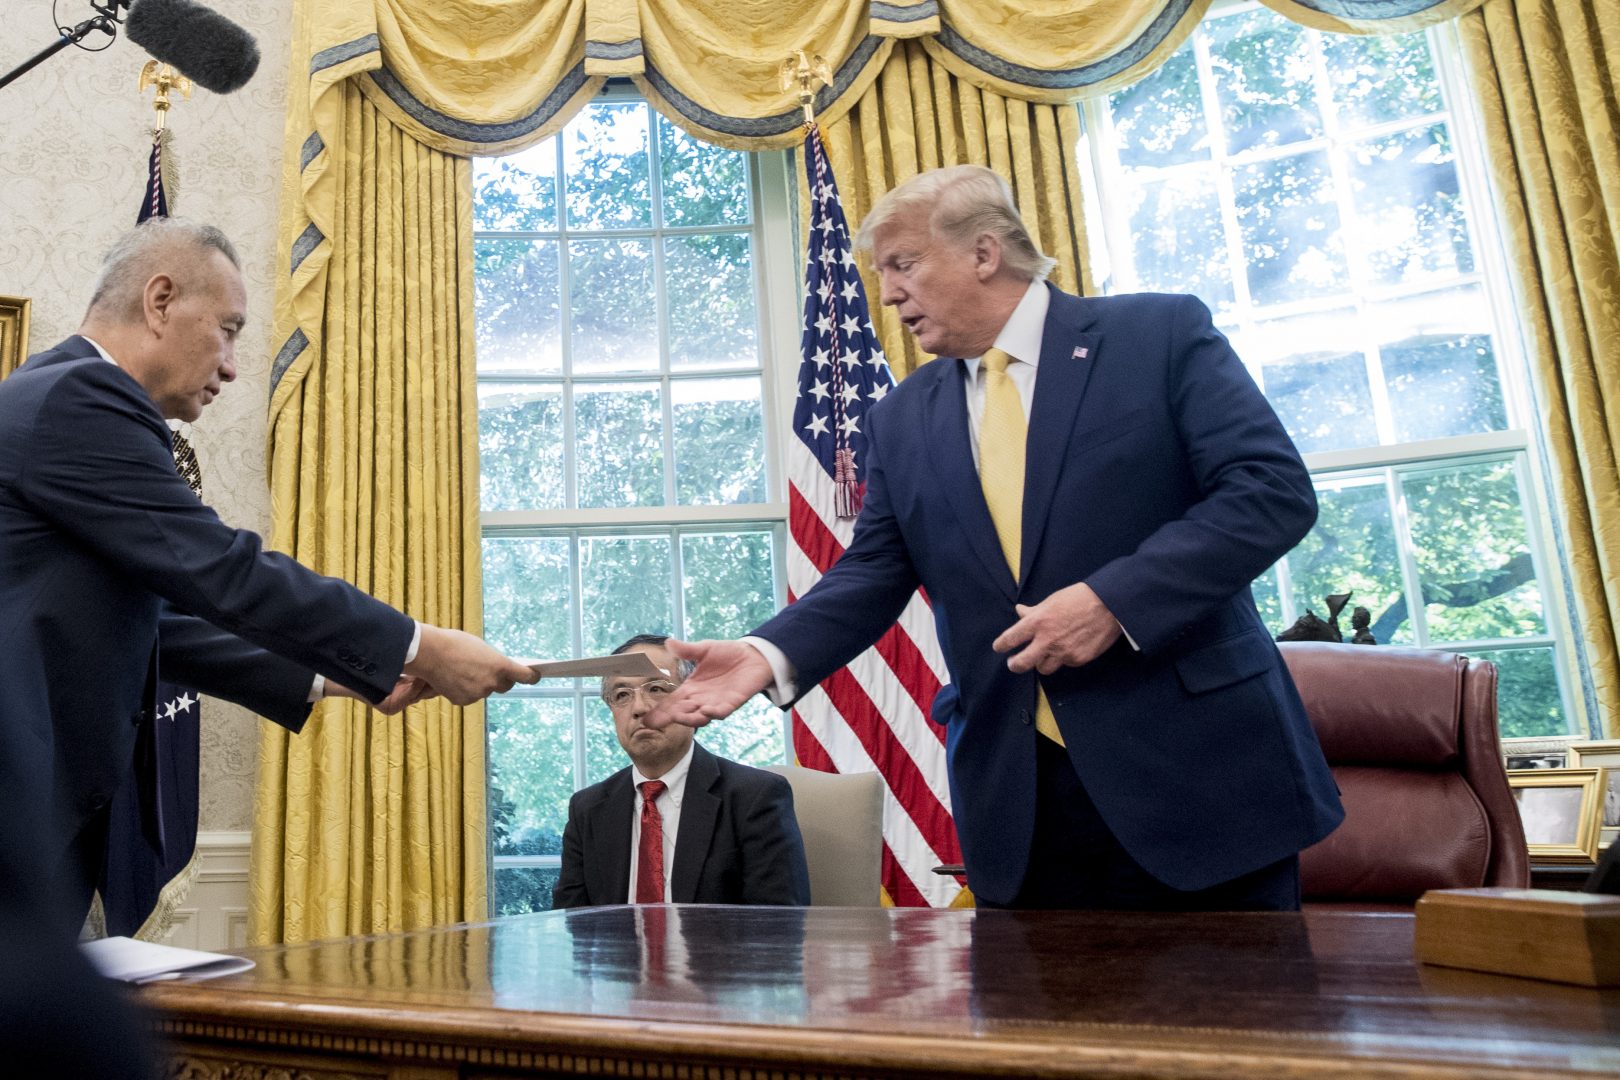 President Donald Trump receives a letter presented to him by Chinese Vice Premier Liu He, left, in the Oval Office of the White House in Washington, Friday, Oct. 11, 2019.